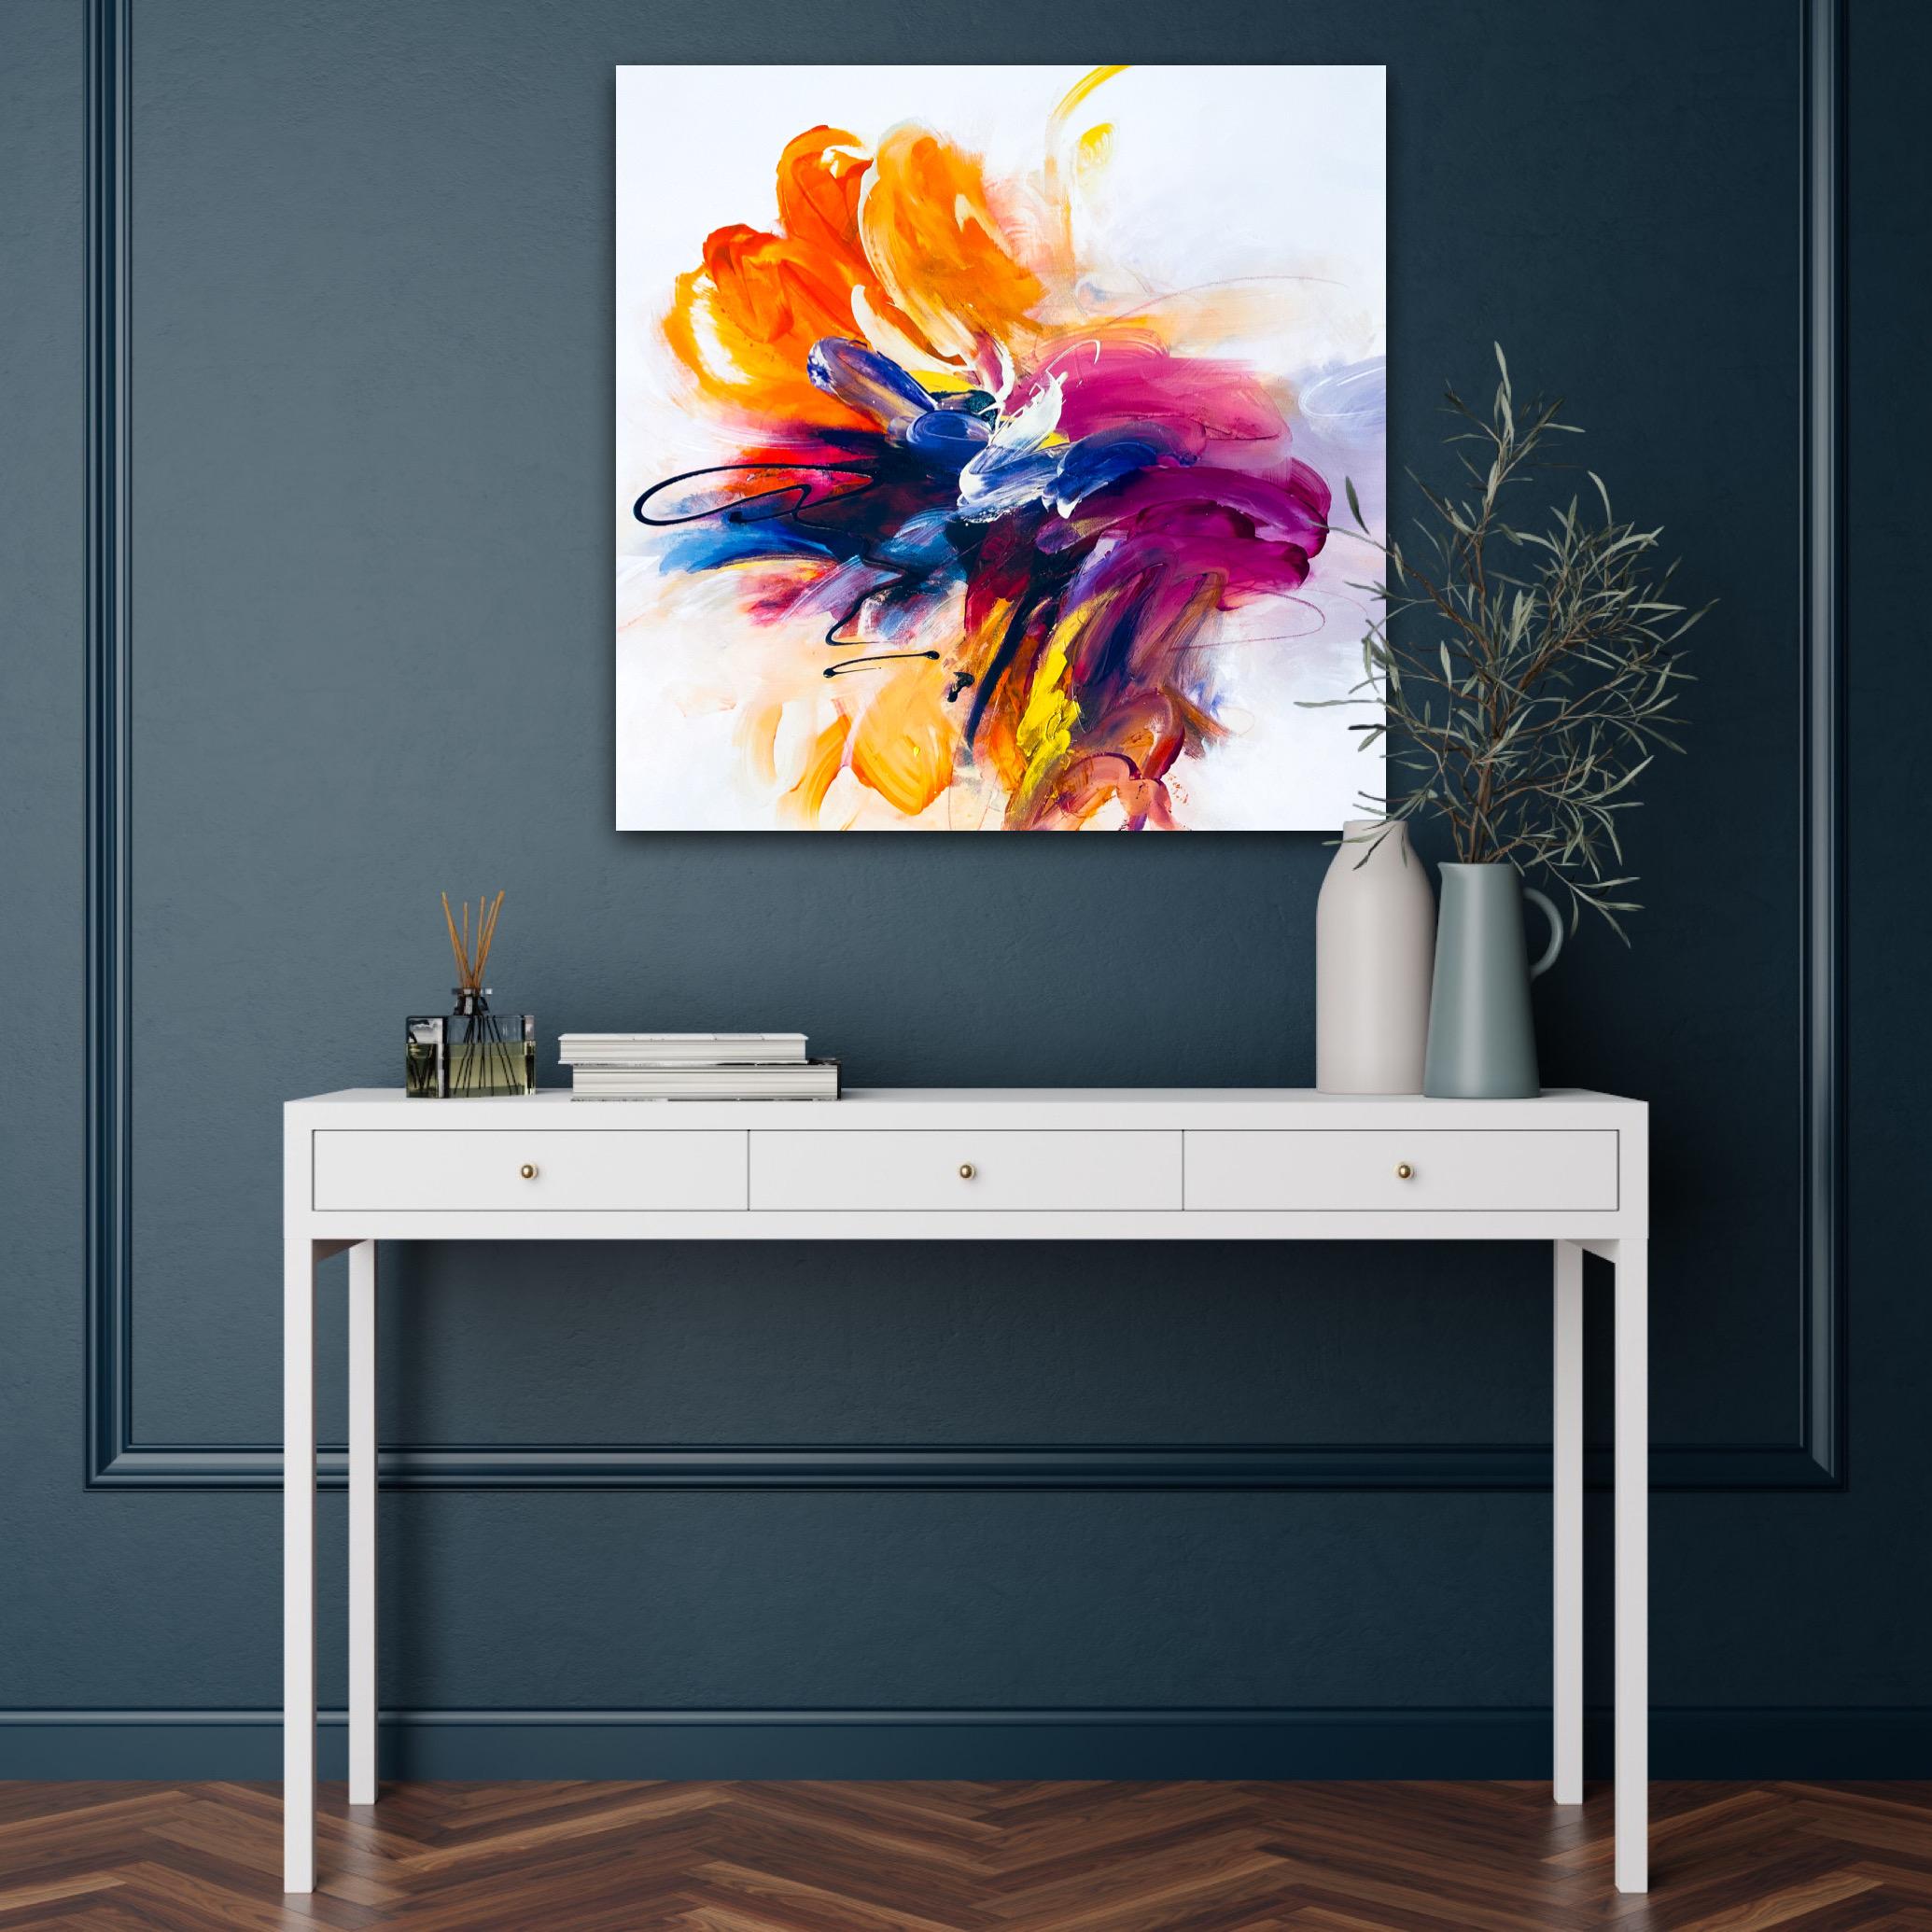 Artist Motivation:

Arrest your Love every time you look at this piece! 

This piece rich, vibrant and emotionally charged, can hang anywhere in your beautiful home! Place it in your favorite reading nook or boldly at above a small table in your